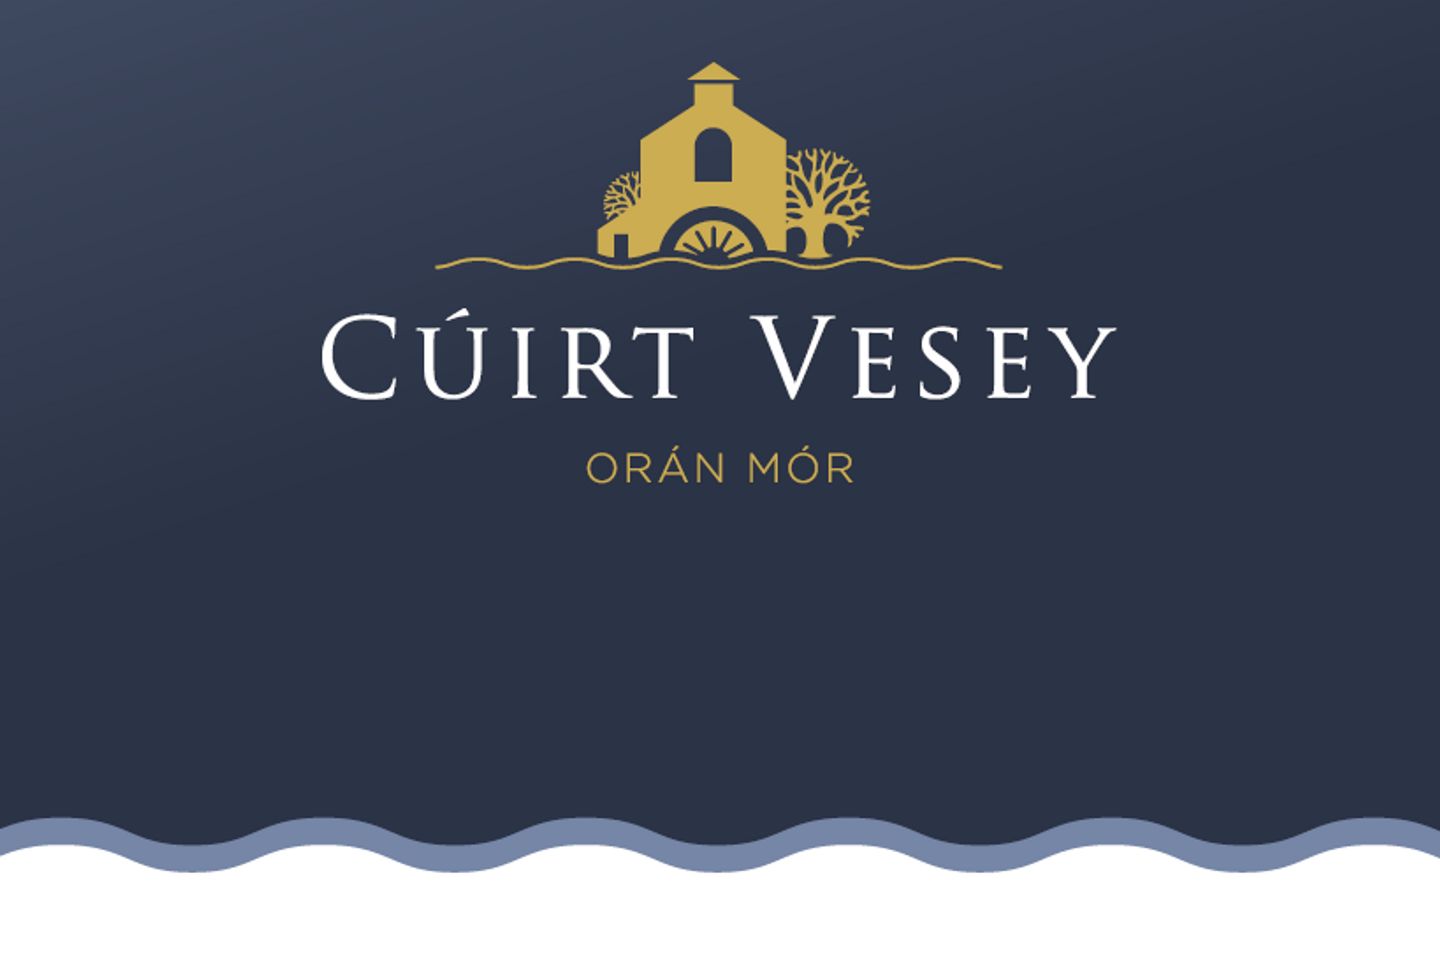 Cúirt Vesey, Old Dublin Road, Oranmore, Oranmore, Co. Galway